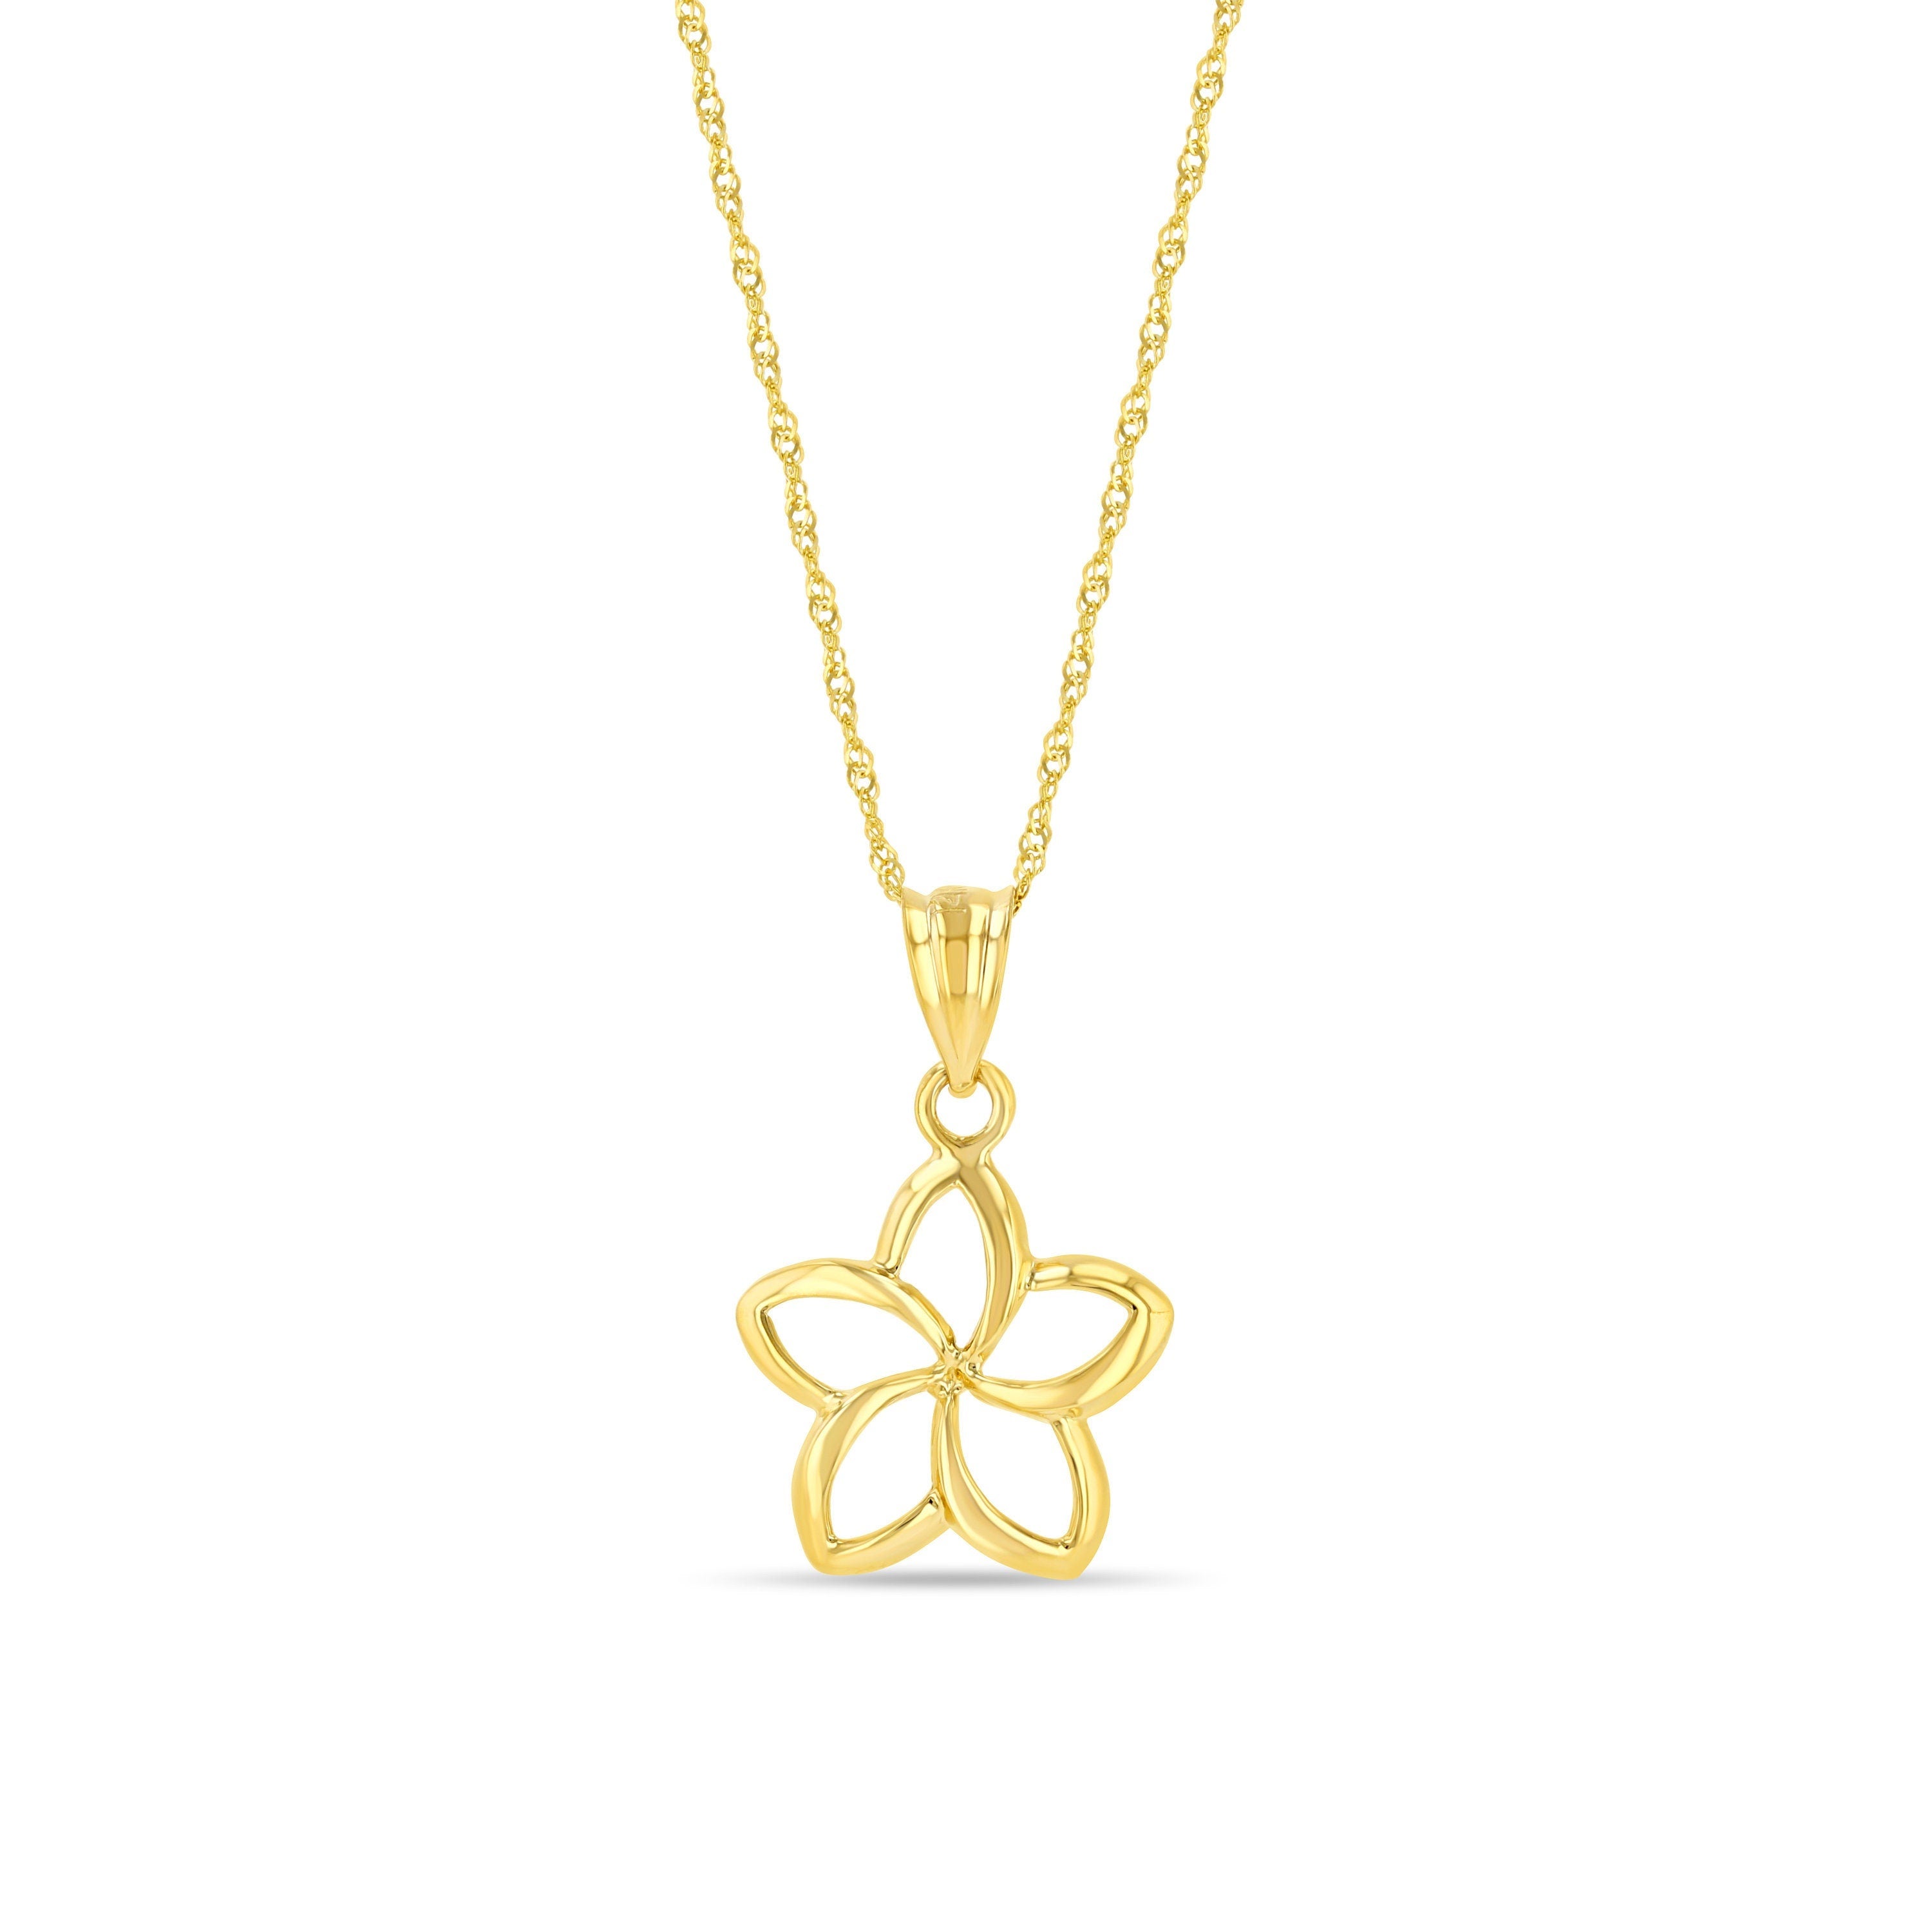 14k solid gold cutout plumeria flower pendant on 18" solid gold chain